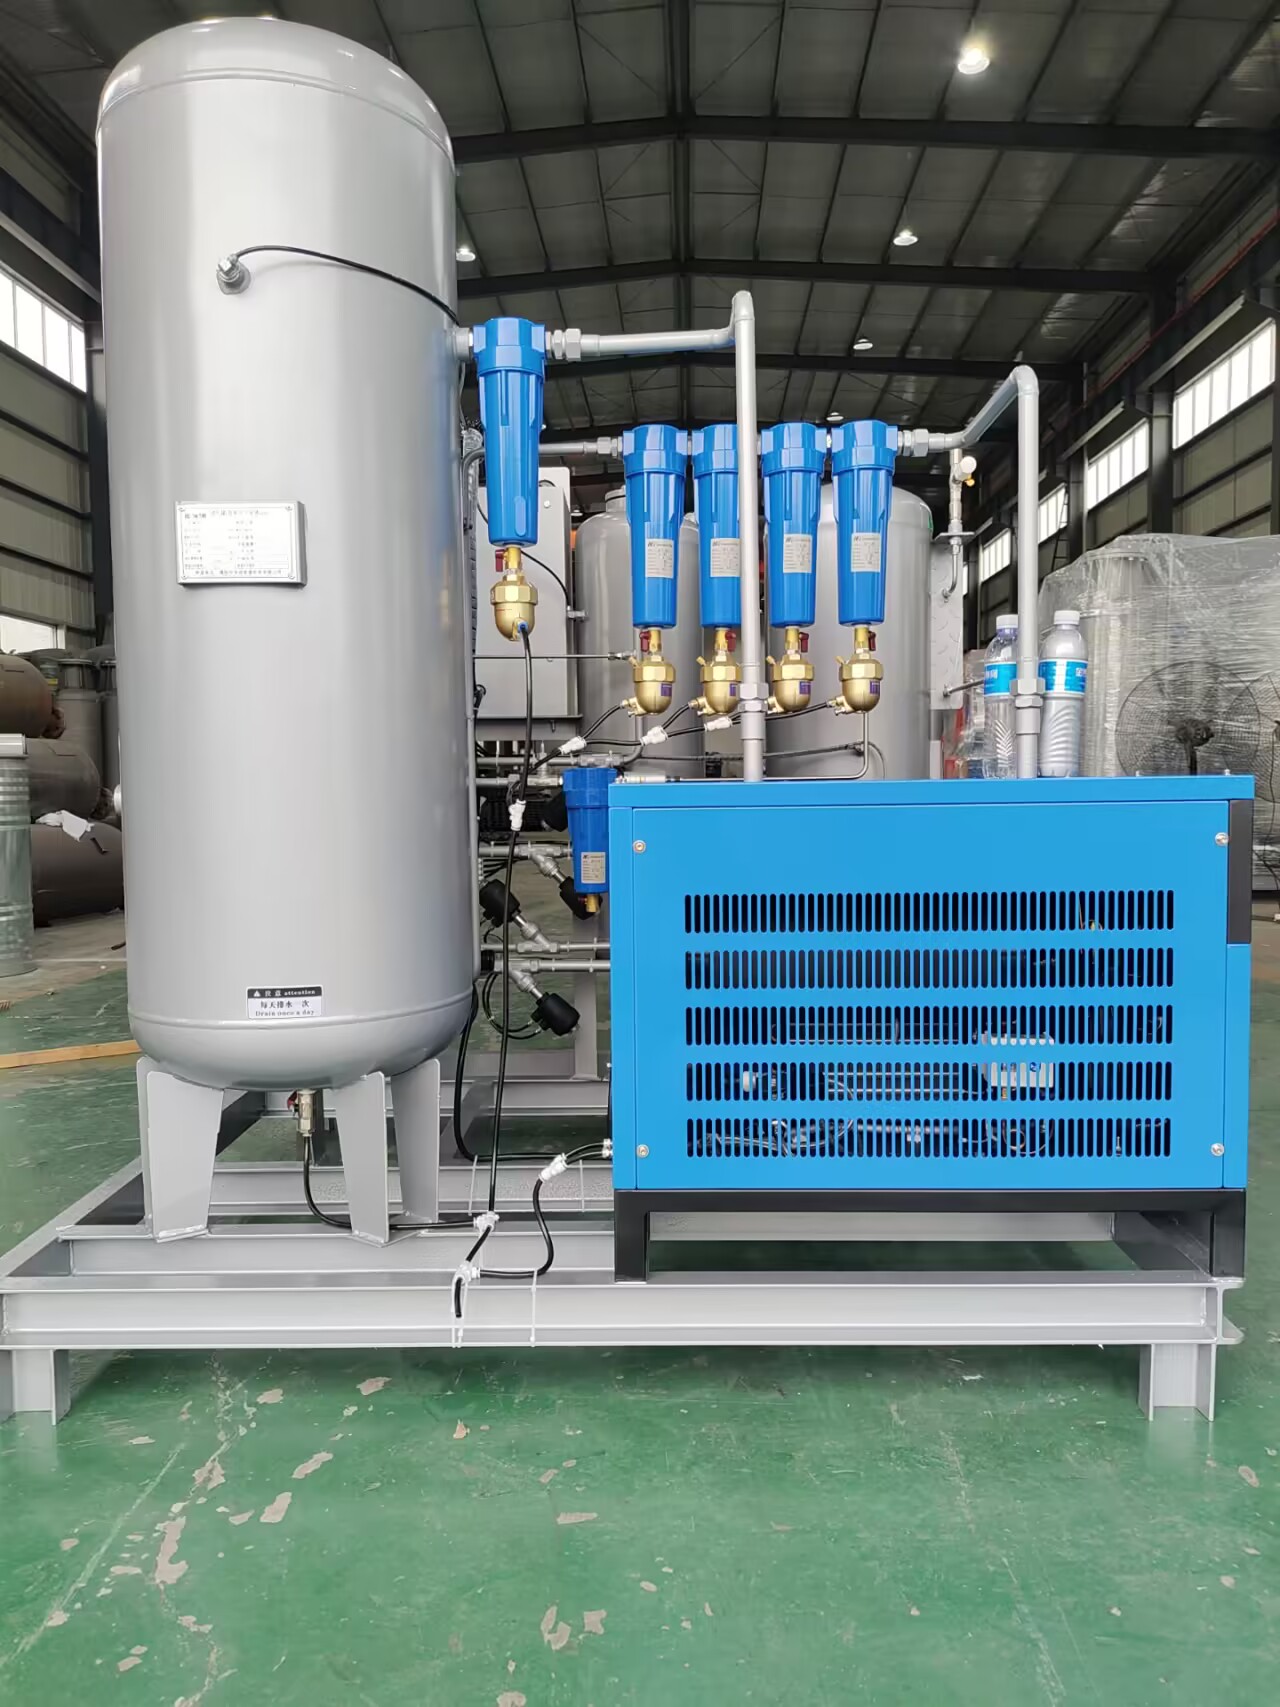 Large ozone generator Oxygen concentrator sewage treatment industrial wastewater sterilization purification supporting psa oxygen generation equipment